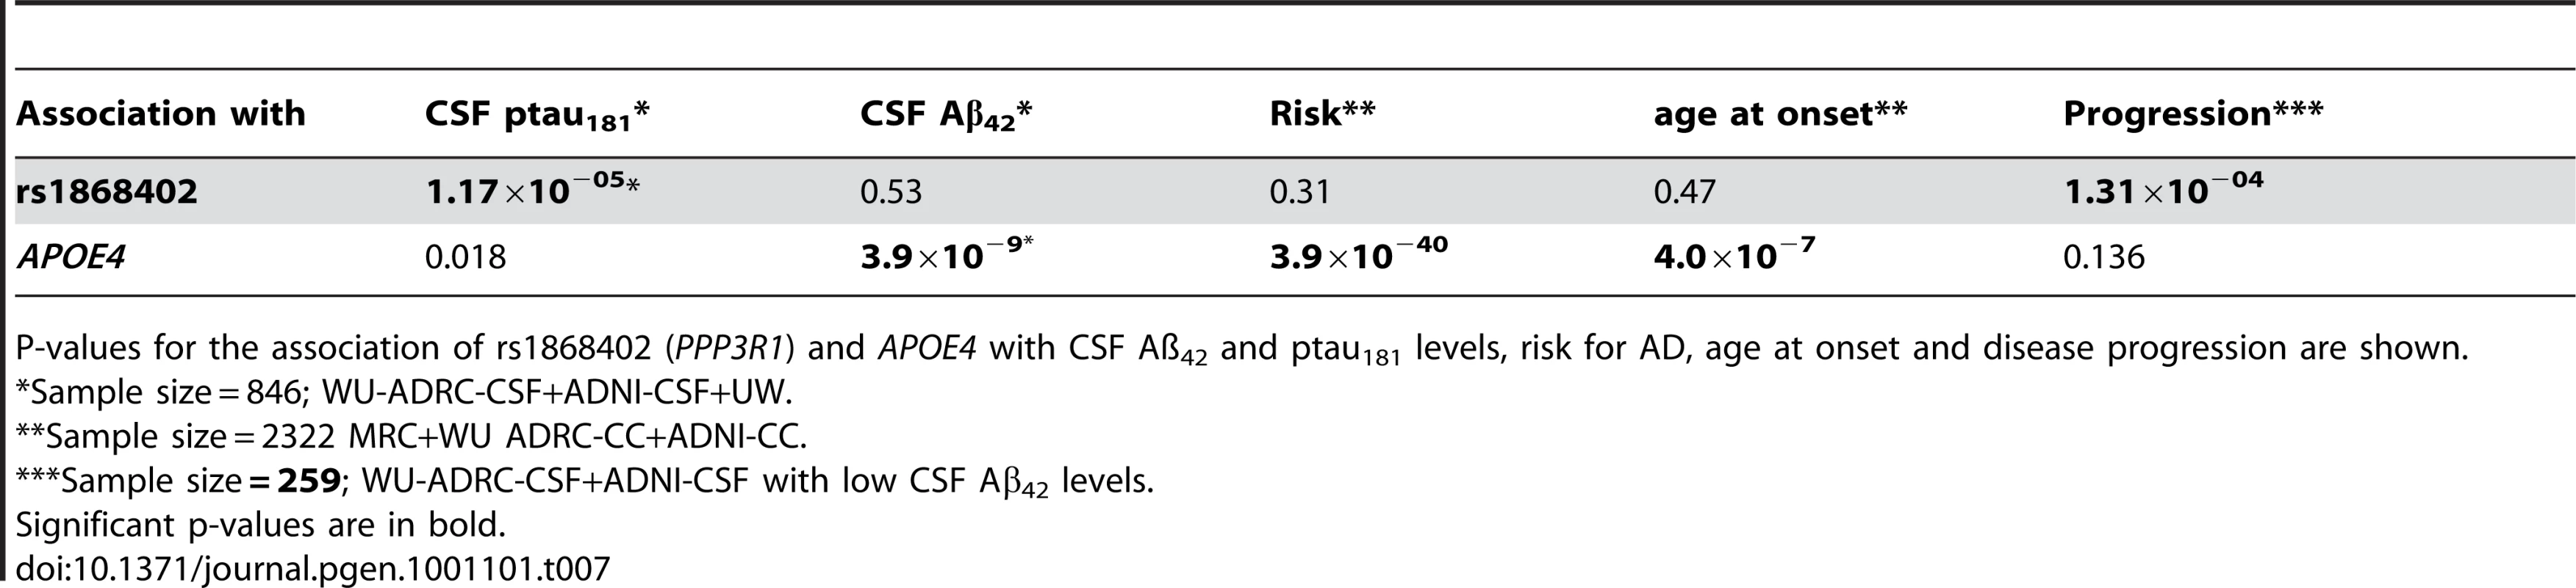 Variants that modify CSF Aβ<sub>42</sub> levels affect risk for AD, whereas variants associated with CSF ptau<sub>181</sub> levels affect rate of progression.